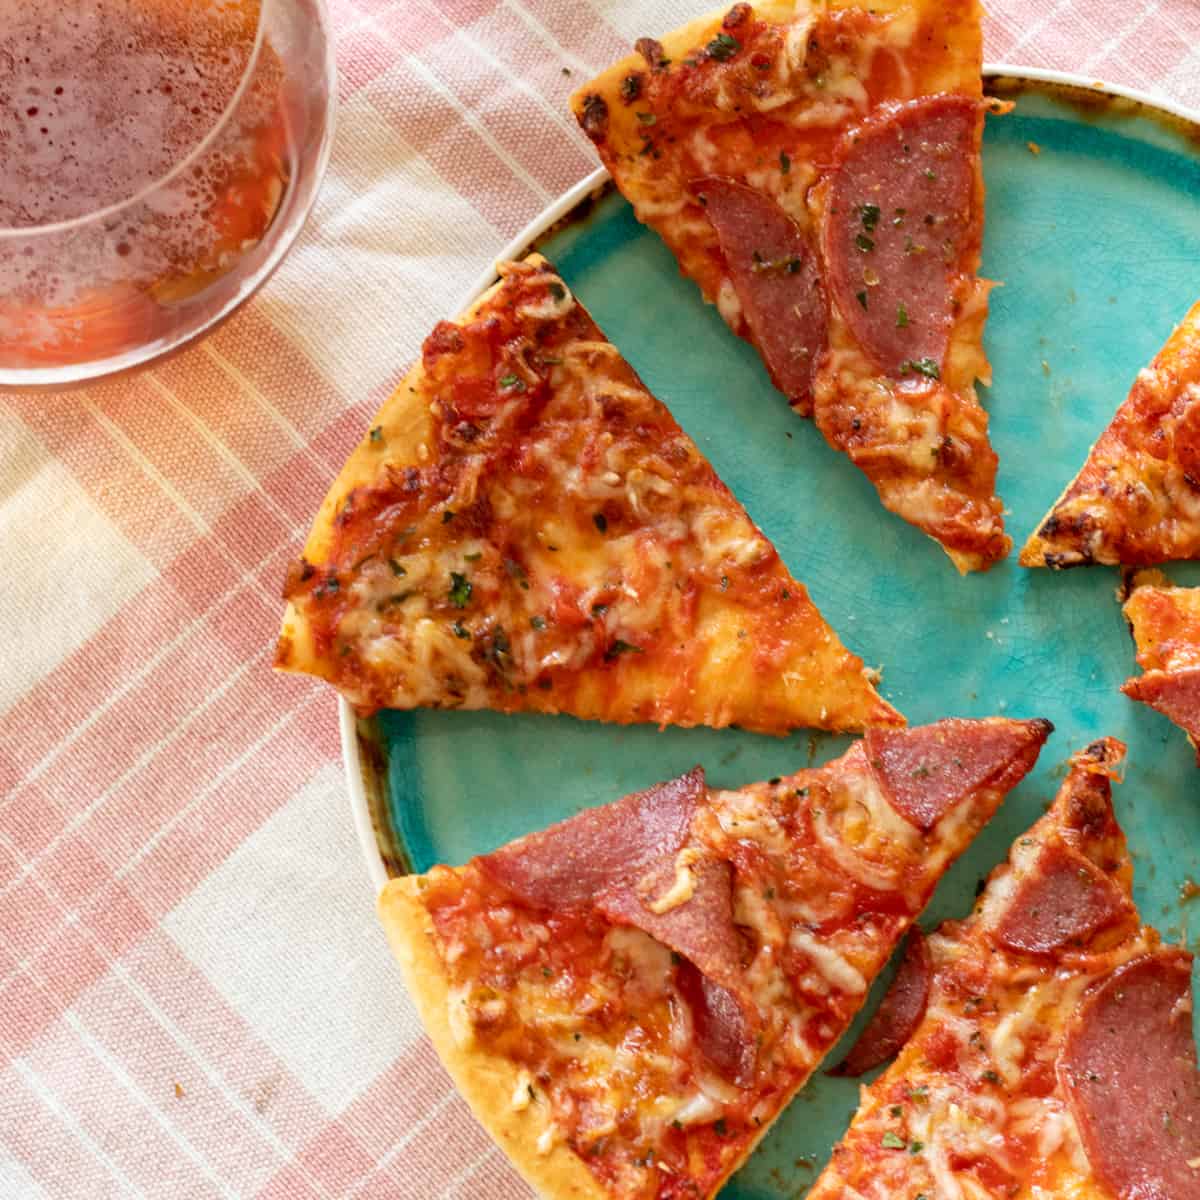 sliced pizza on a blue plate